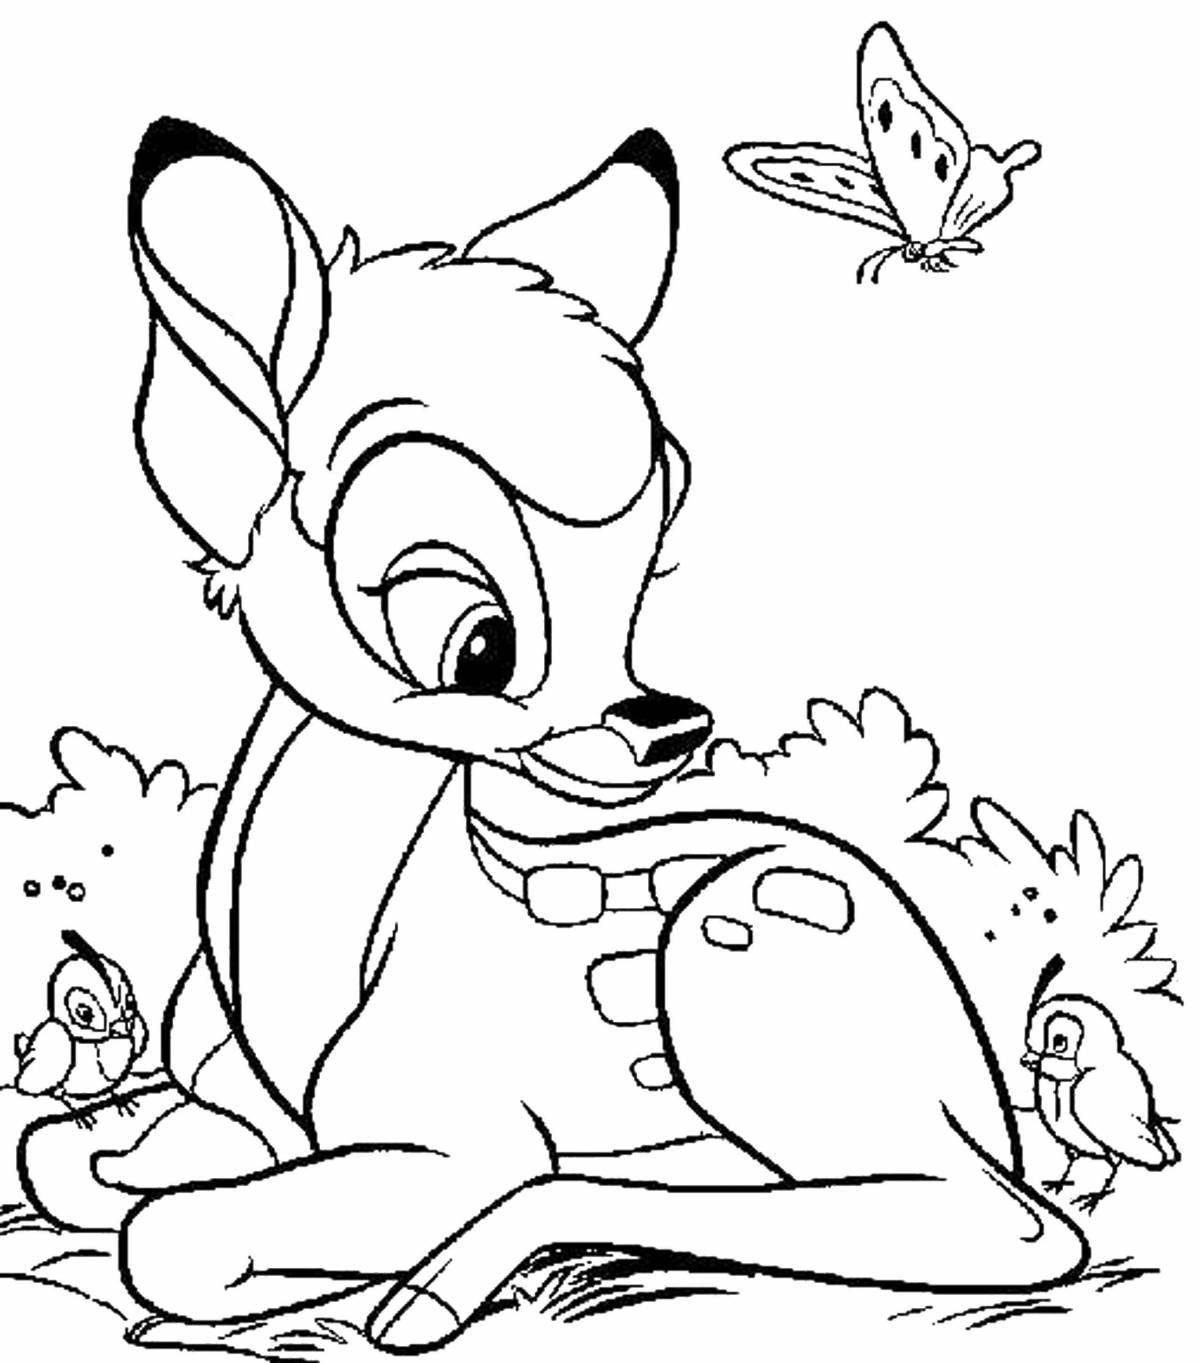 Color-glorious coloring book for children from cartoons 5-6 years old